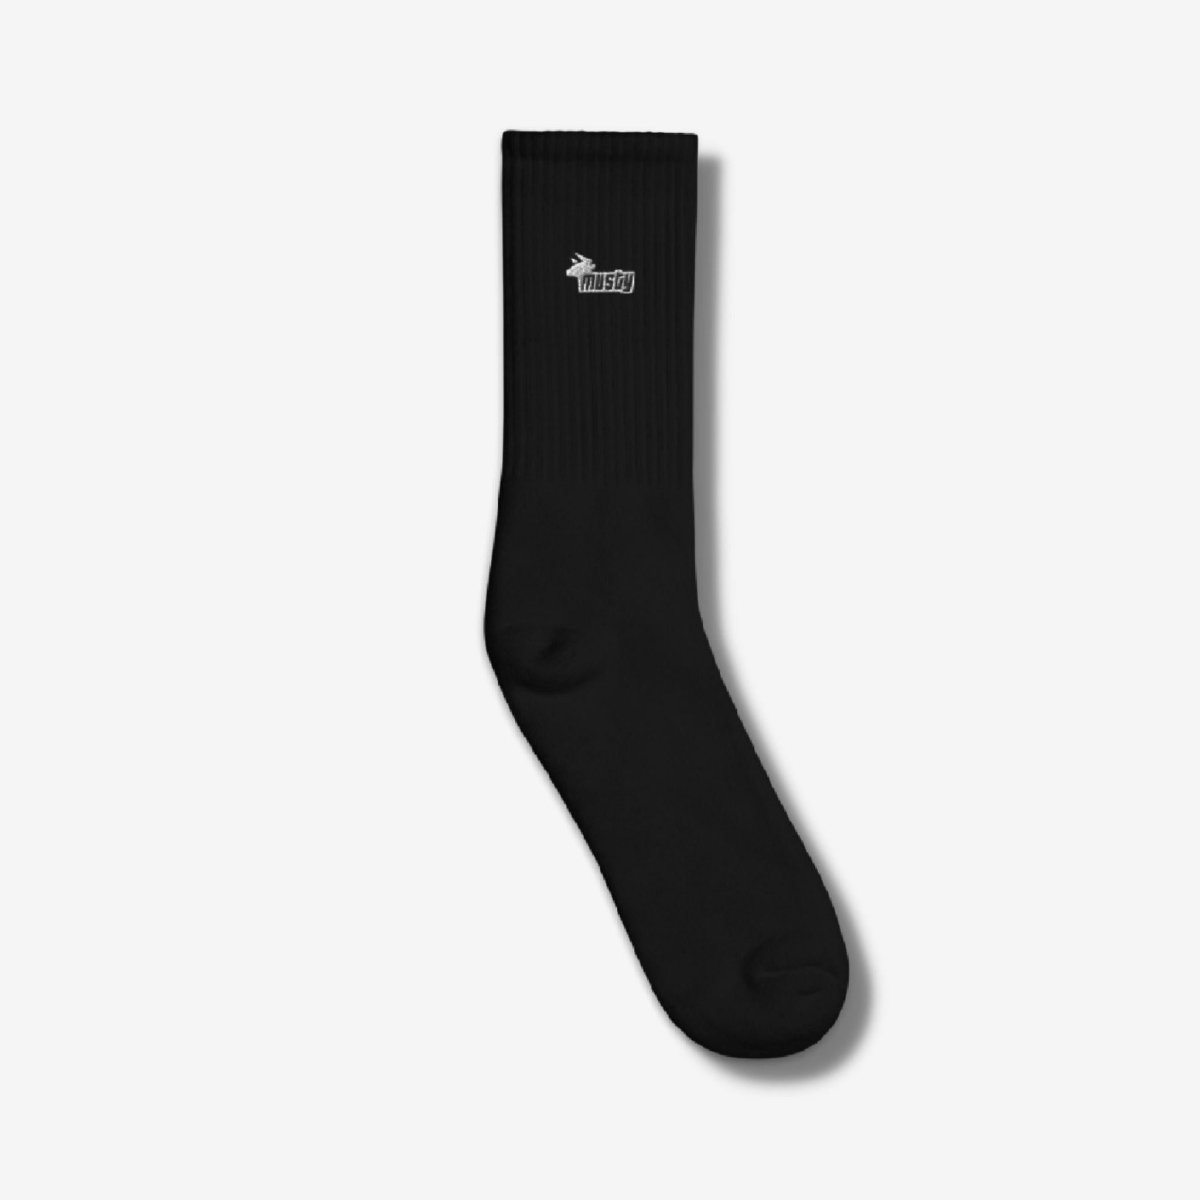 MUSTY EMBROIDERED SOCKS - BLACK | Amustycow